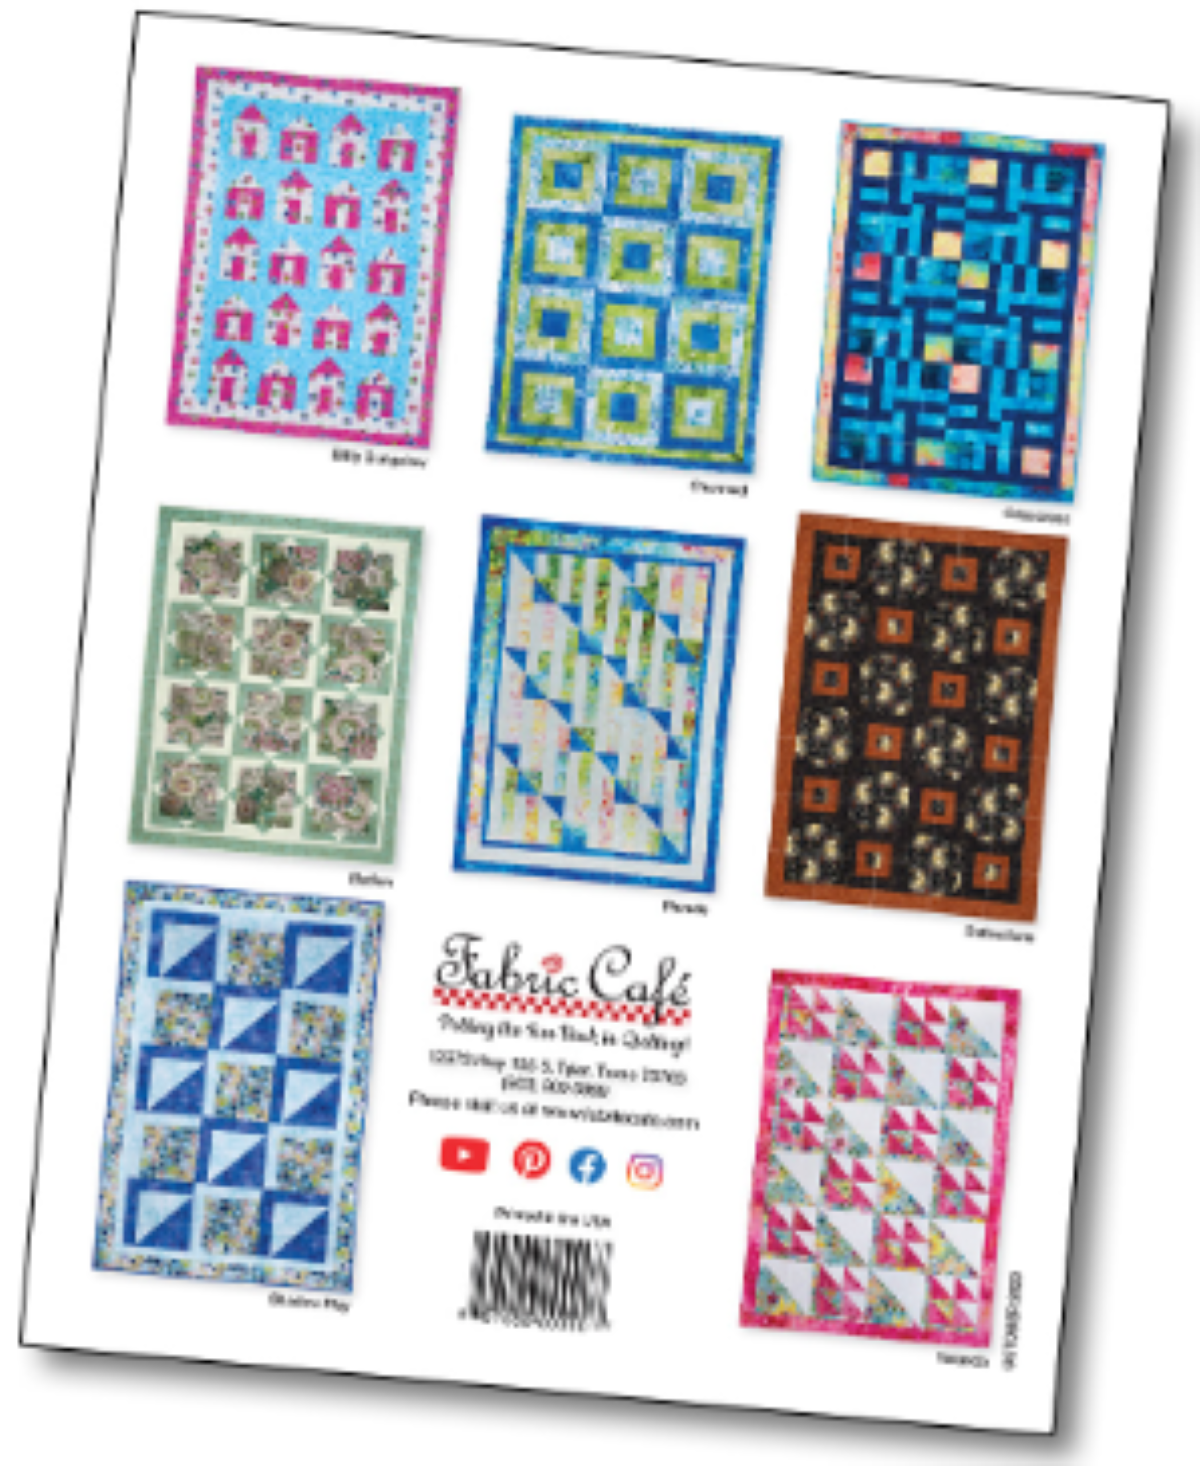 Stash Busting with 3-Yard Quilts by Donna Robertson and Fran Morgan for Fabric Cafe